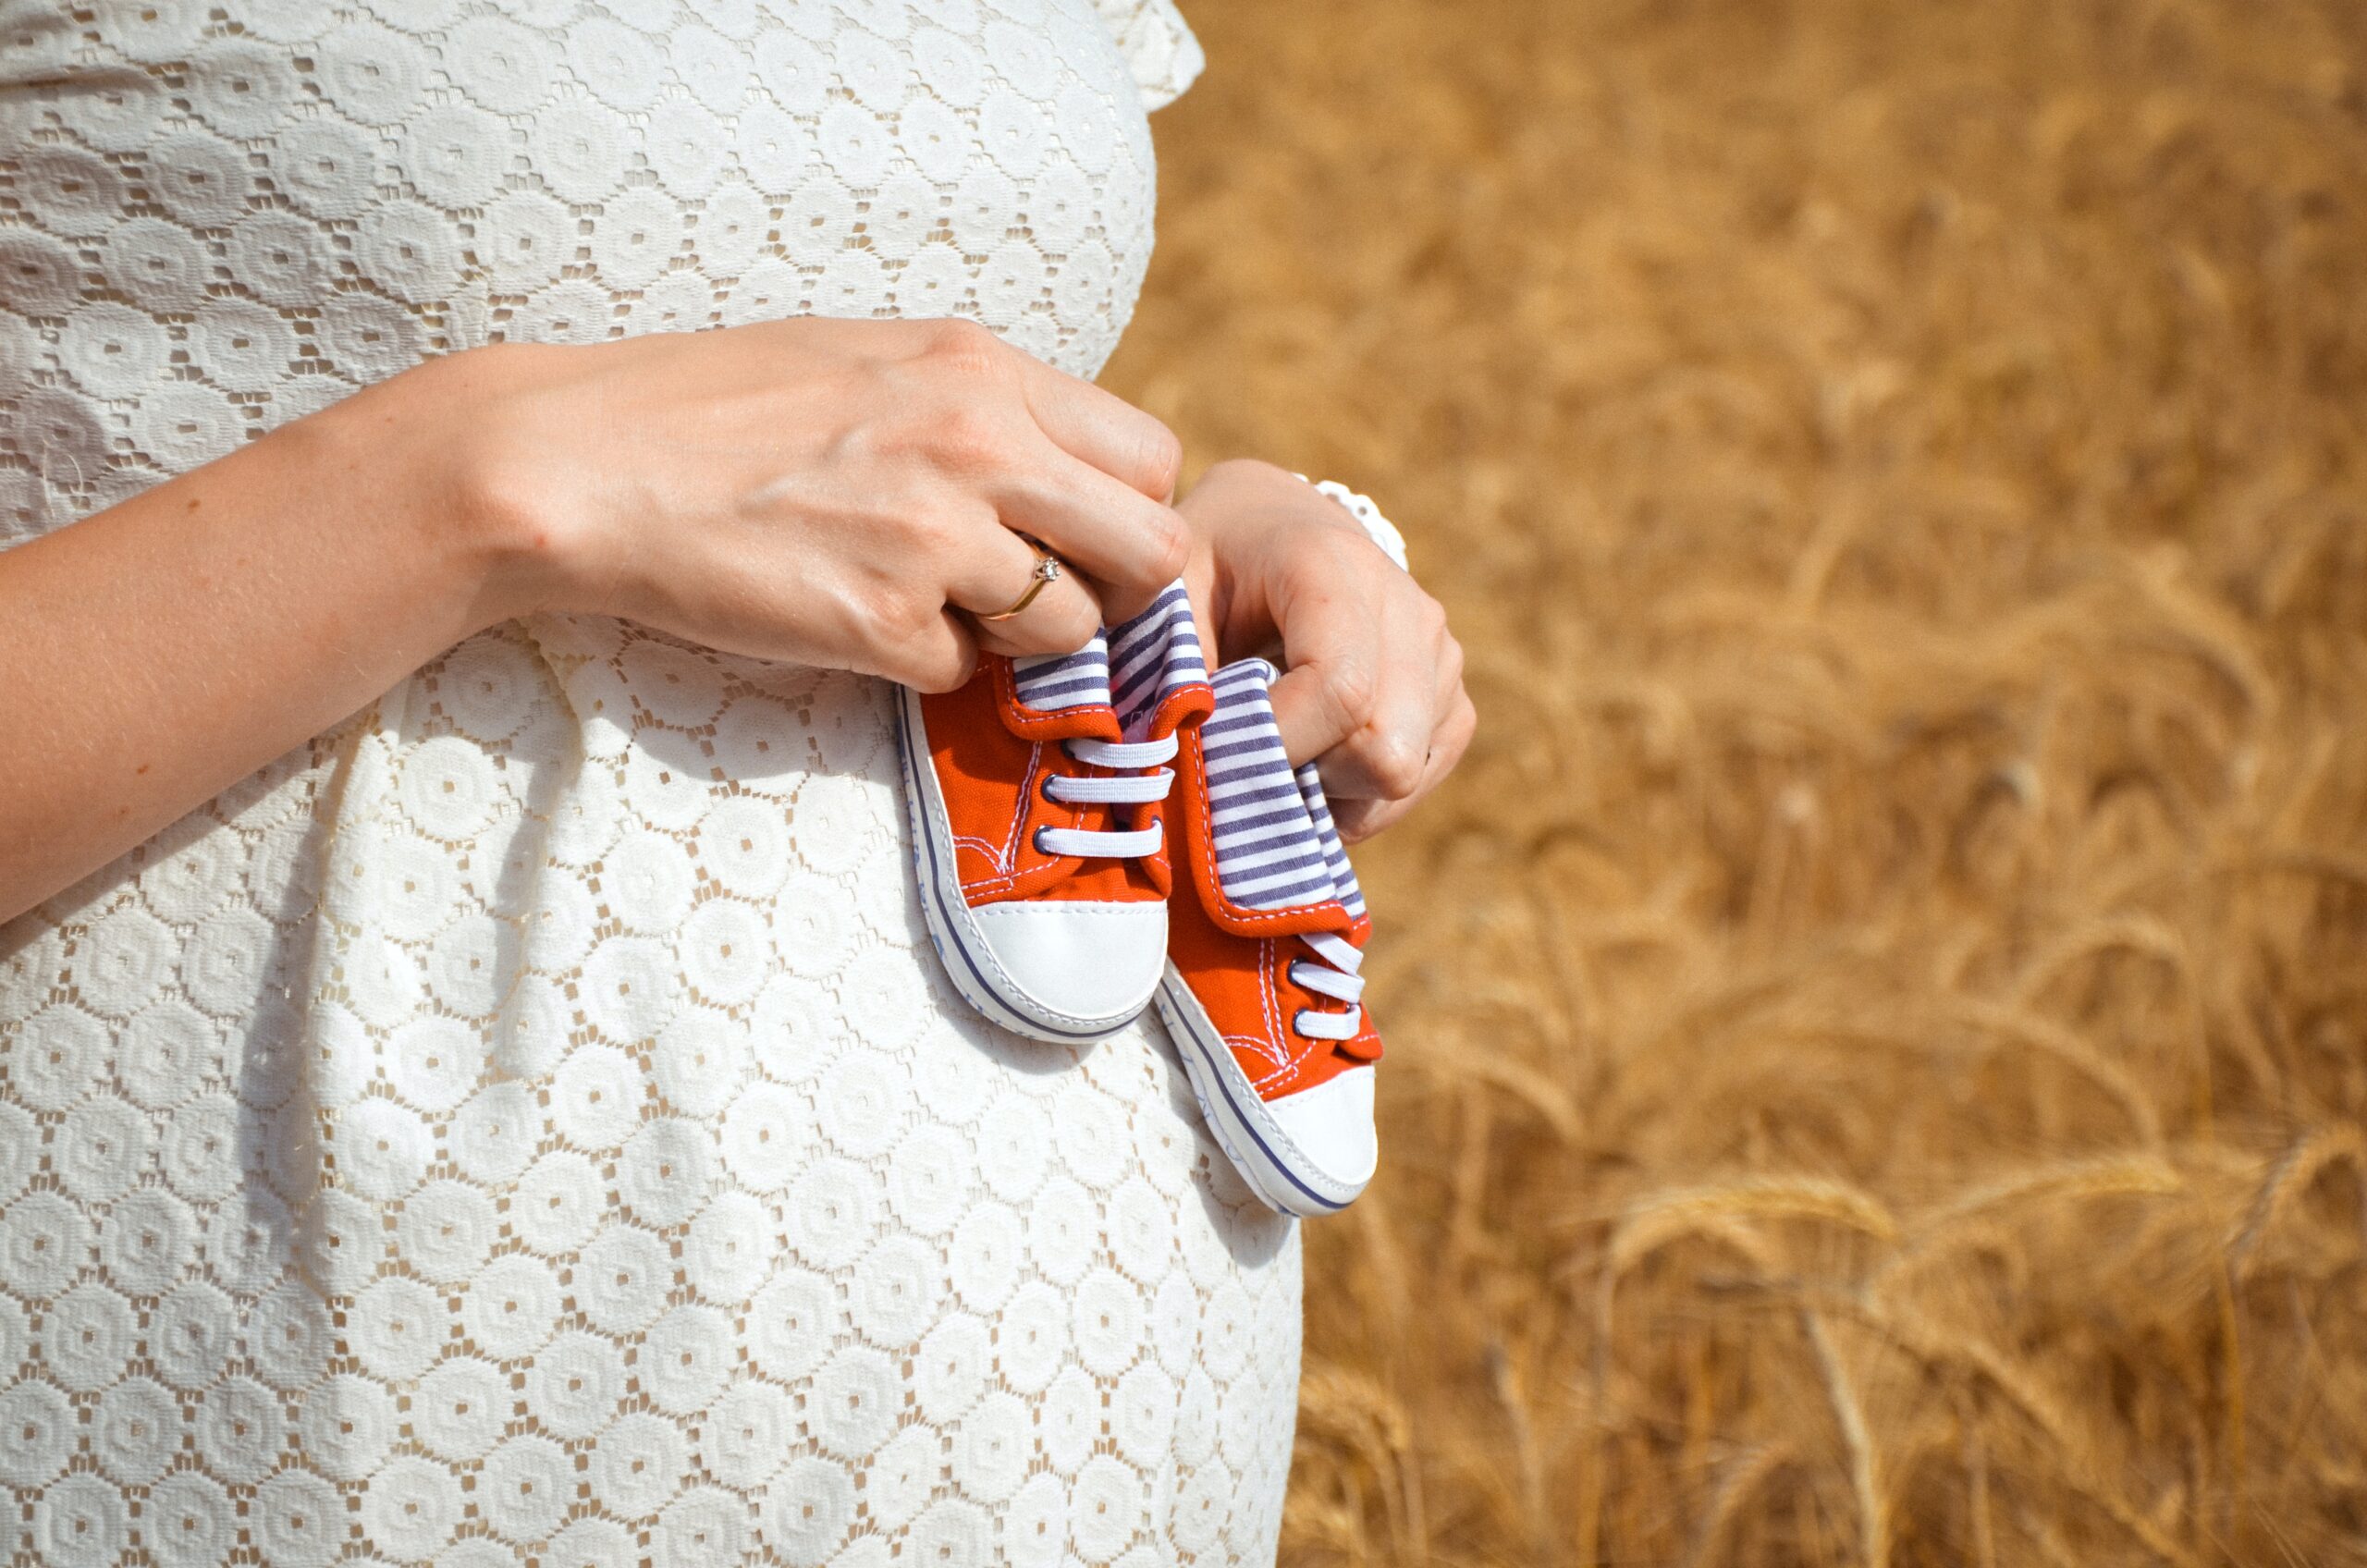 Pregnant woman carrying the shoes of a newborn or baby